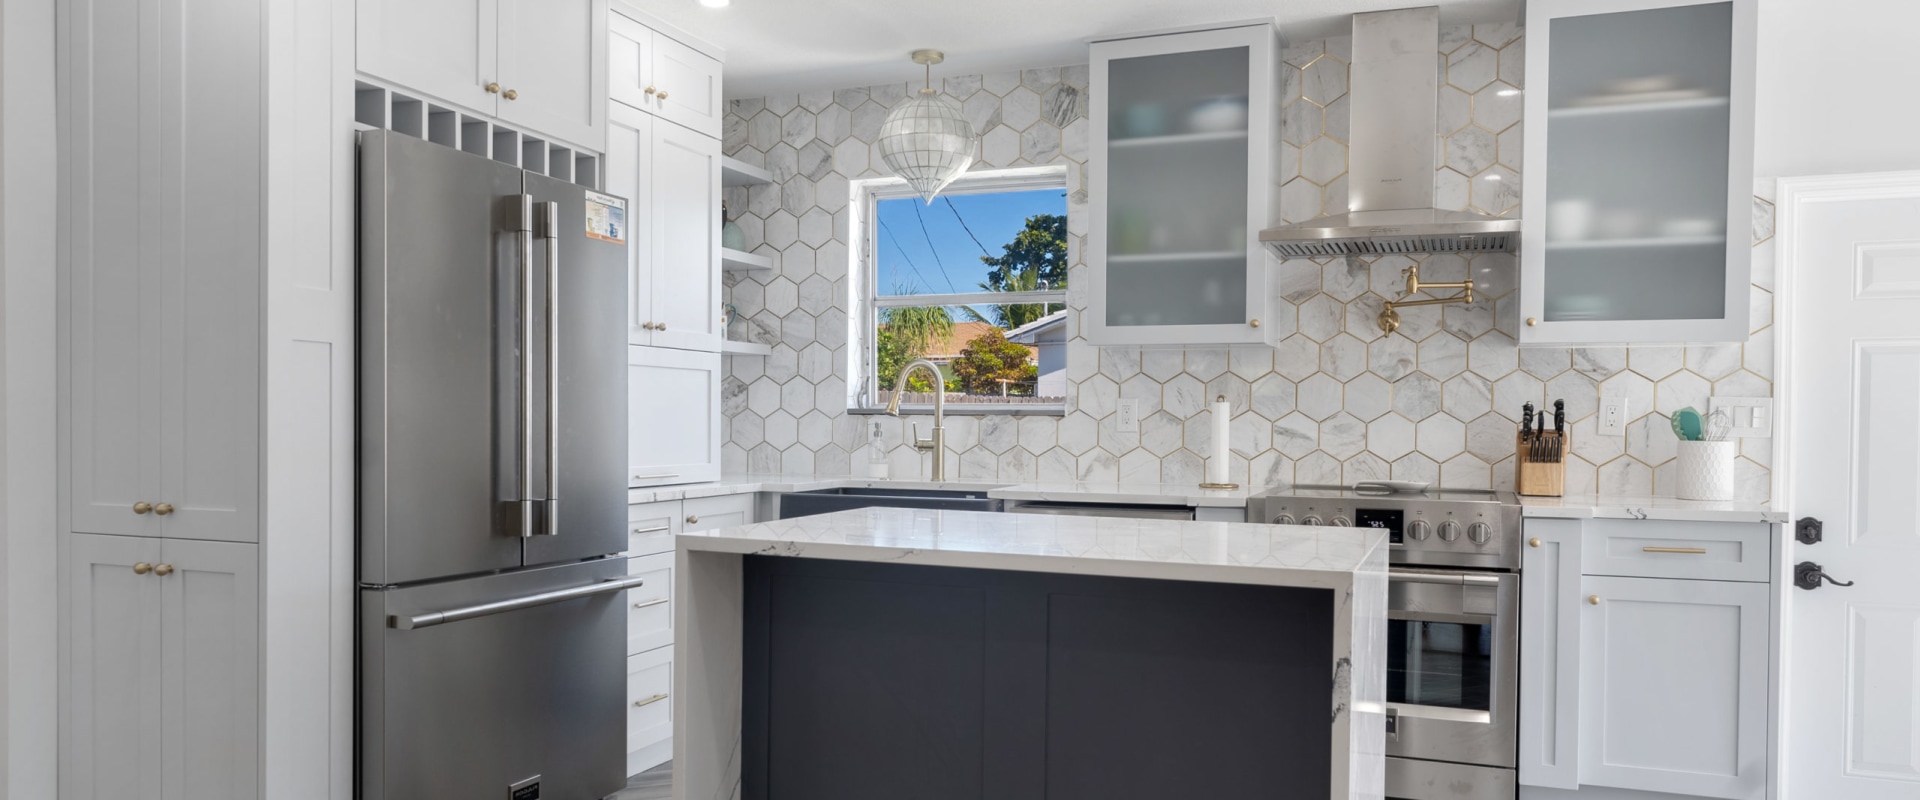 Incorporating Smart Home Technology for Your Kitchen Remodel